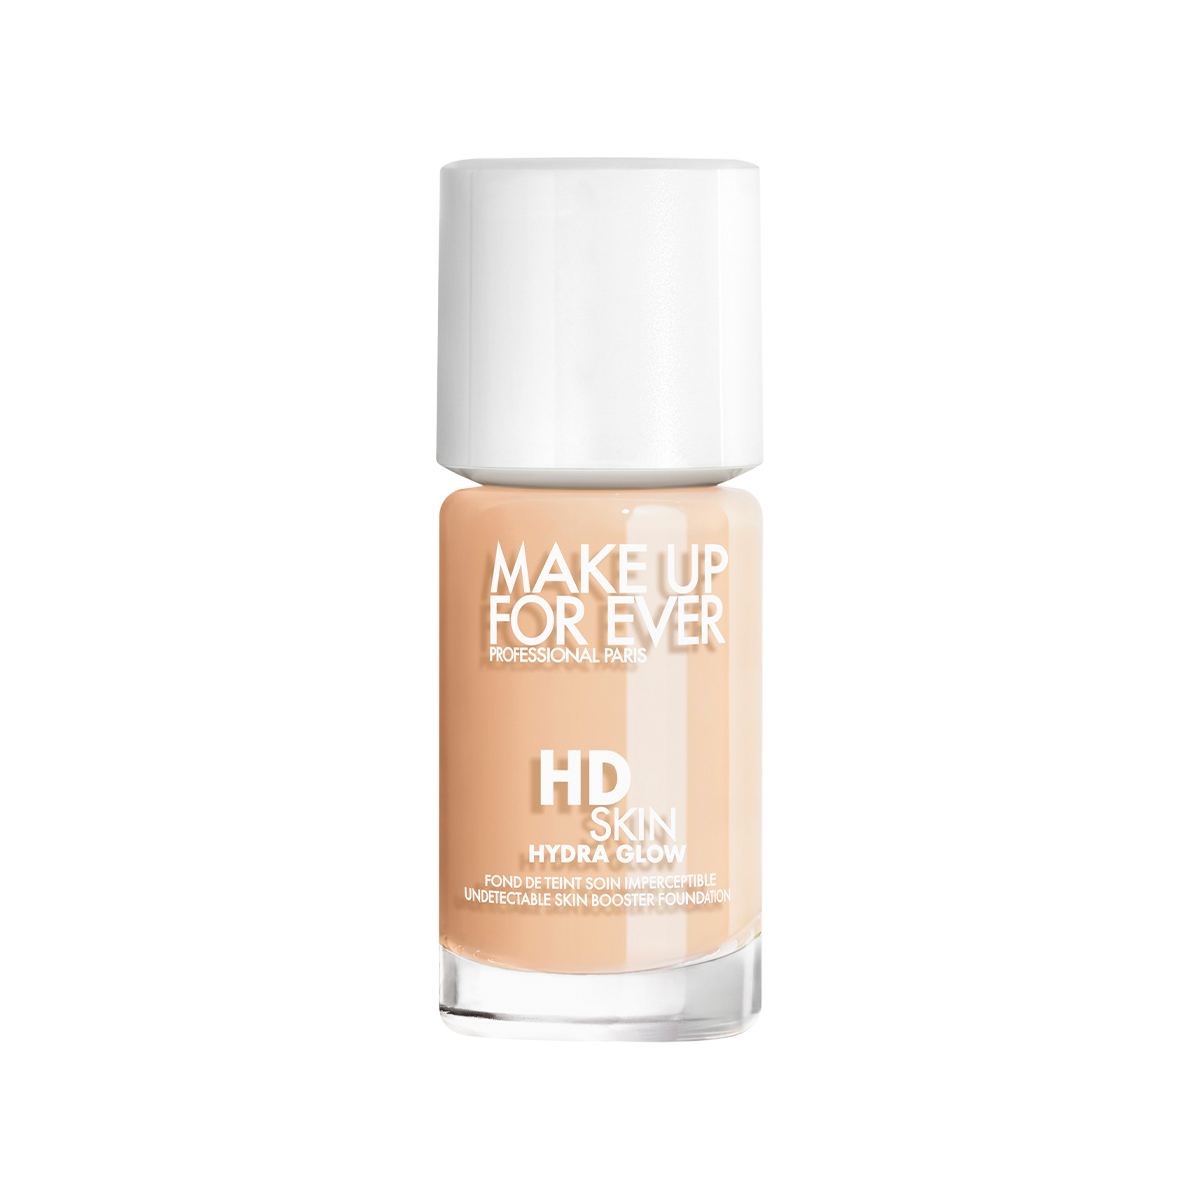 Shop Make Up For Ever Hd Skin Hydra Glow In Warm Porcelain